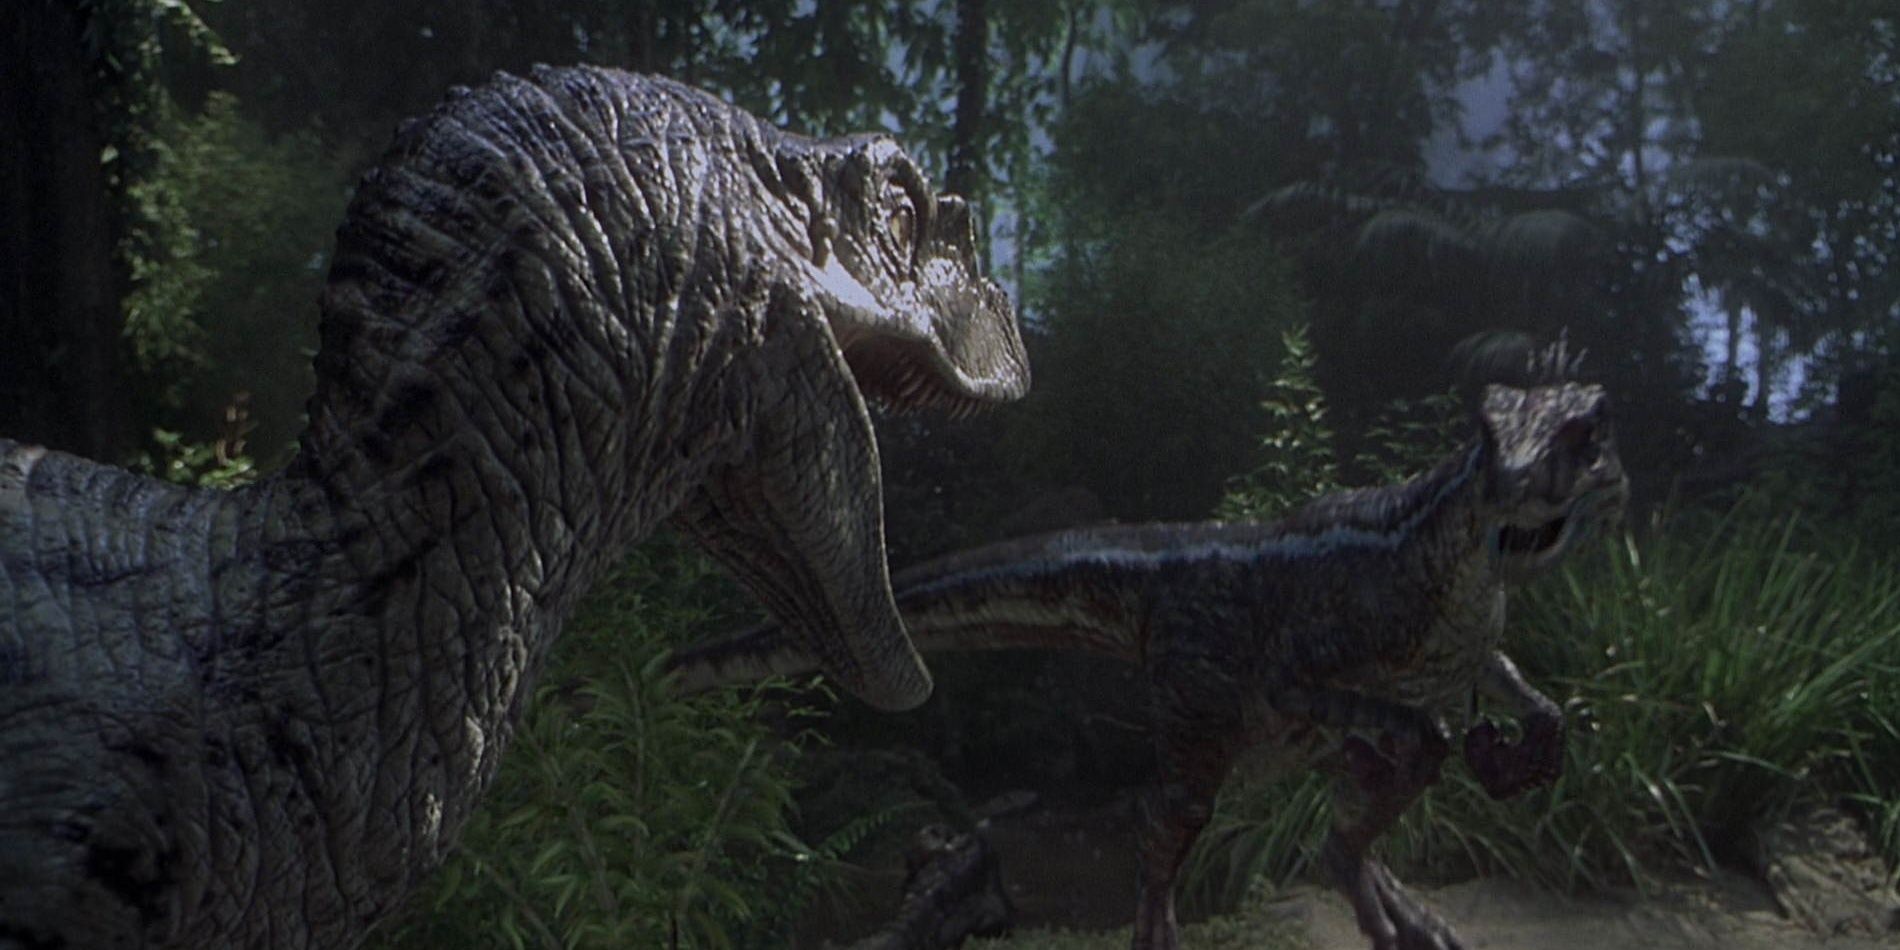 The female gives orders in Jurassic Park III